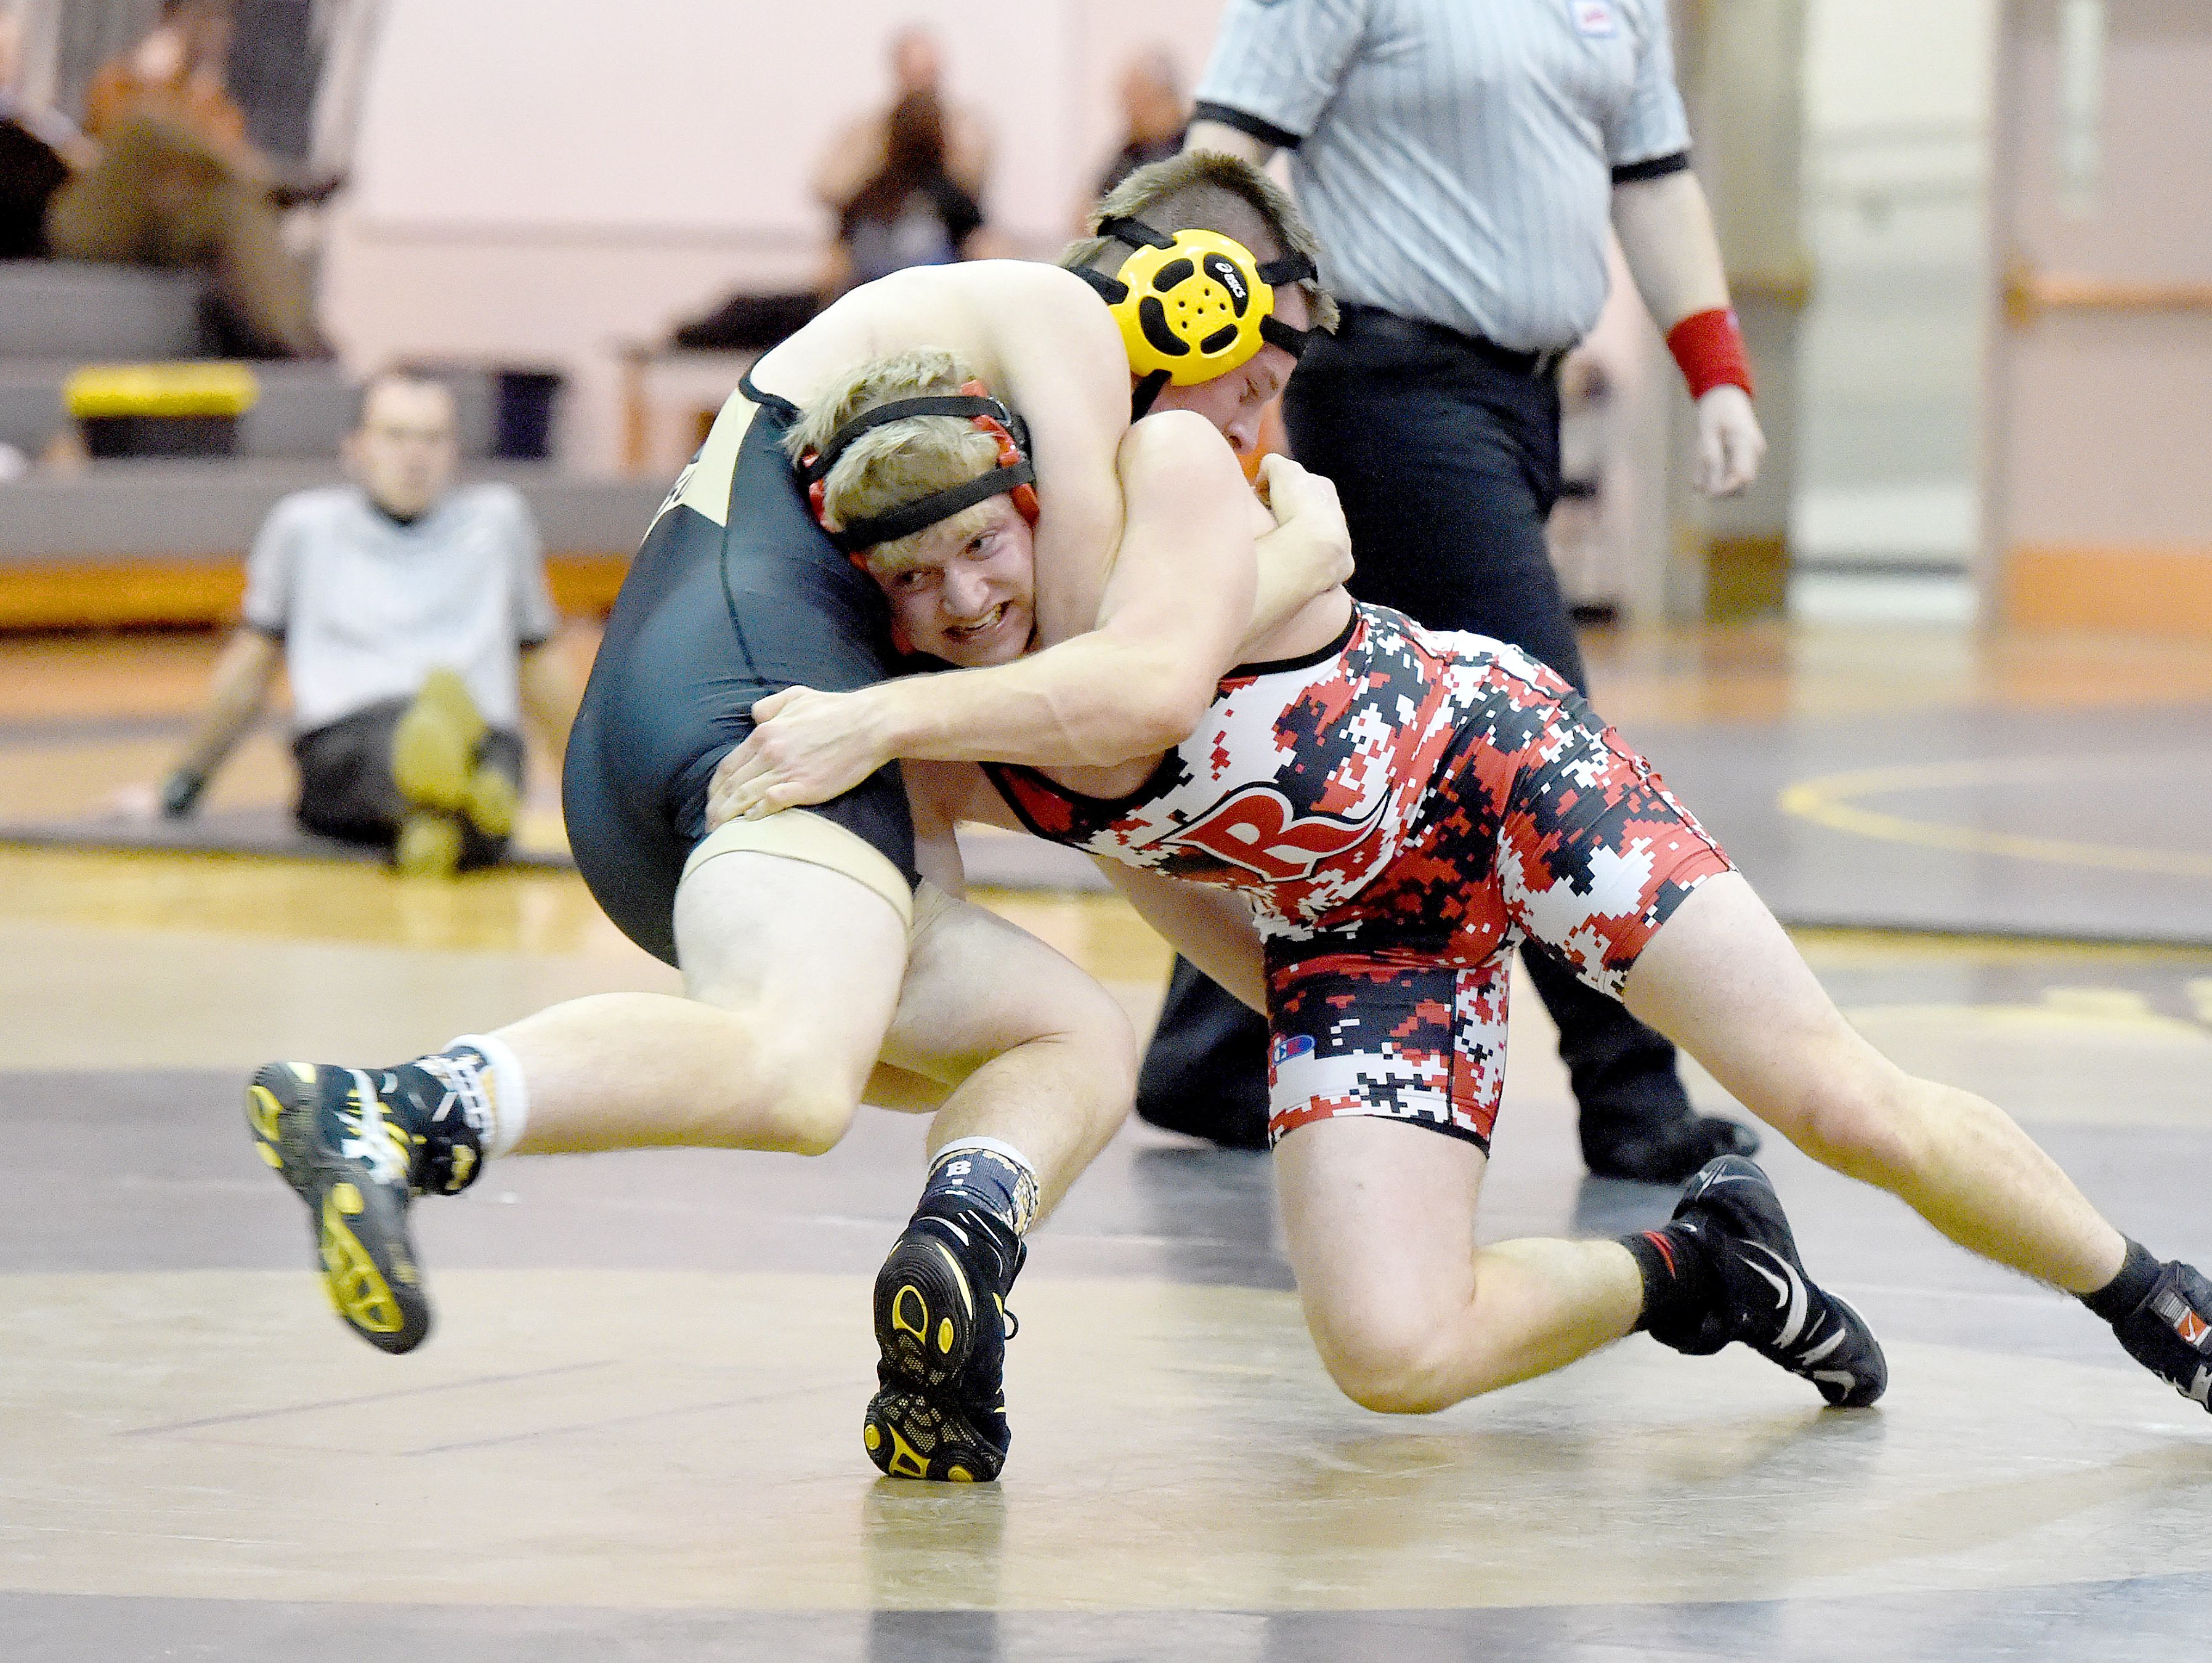 Riverheads' Dillon Martin (right) wrestles Buffalo Gap's Ryan Wilcher in a 160-pound weight class during the Bison Wrestling Quad in Swoope on Wednesday, Jan. 6, 2016. Martin won the match.